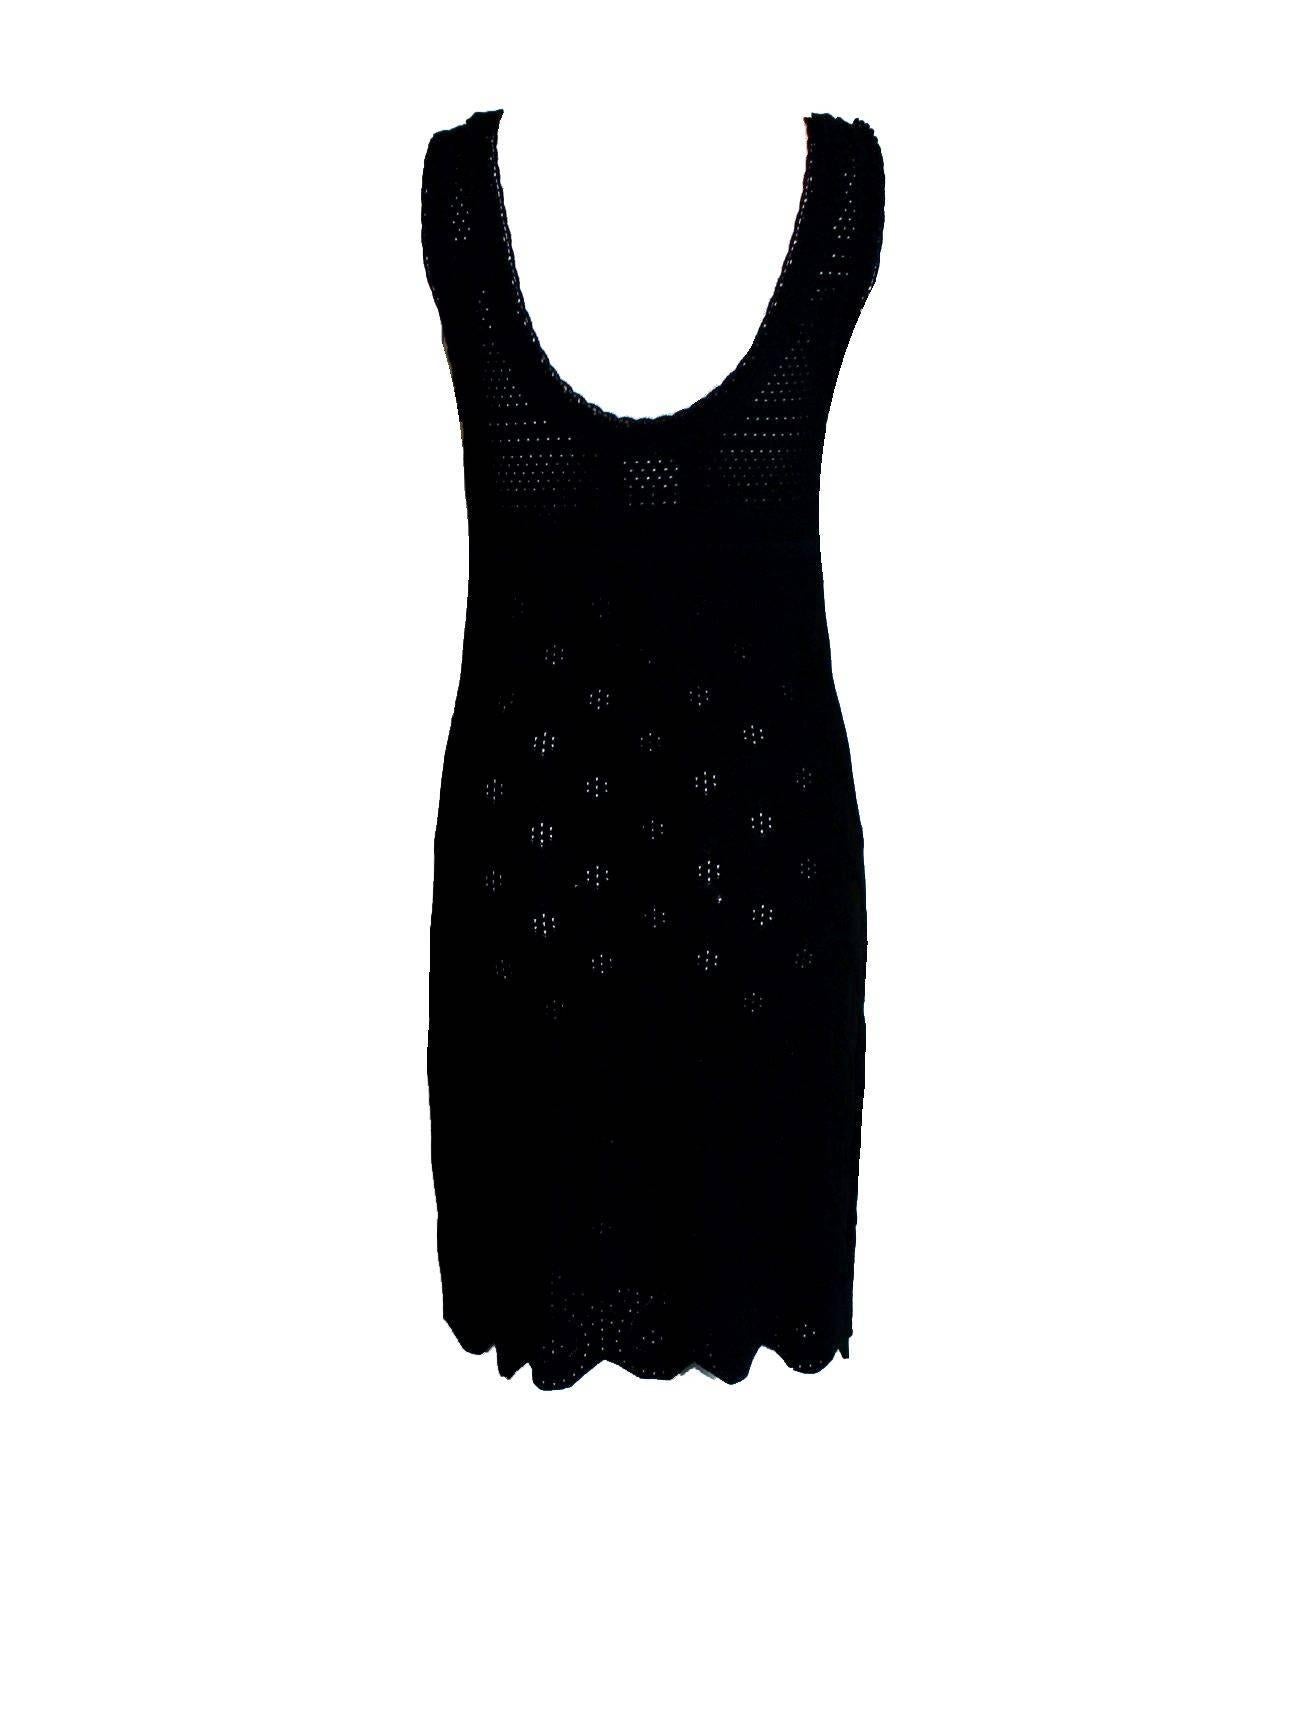 Lovely new interpretation of the timeless Chanel classic little black dress
A true Chanel signature piece that will last for many years
3D crochet knit
Two front pockets
CC logo buttons
Simply slips on
Made in France
Dry Clean Only
Size 36
Brandnew